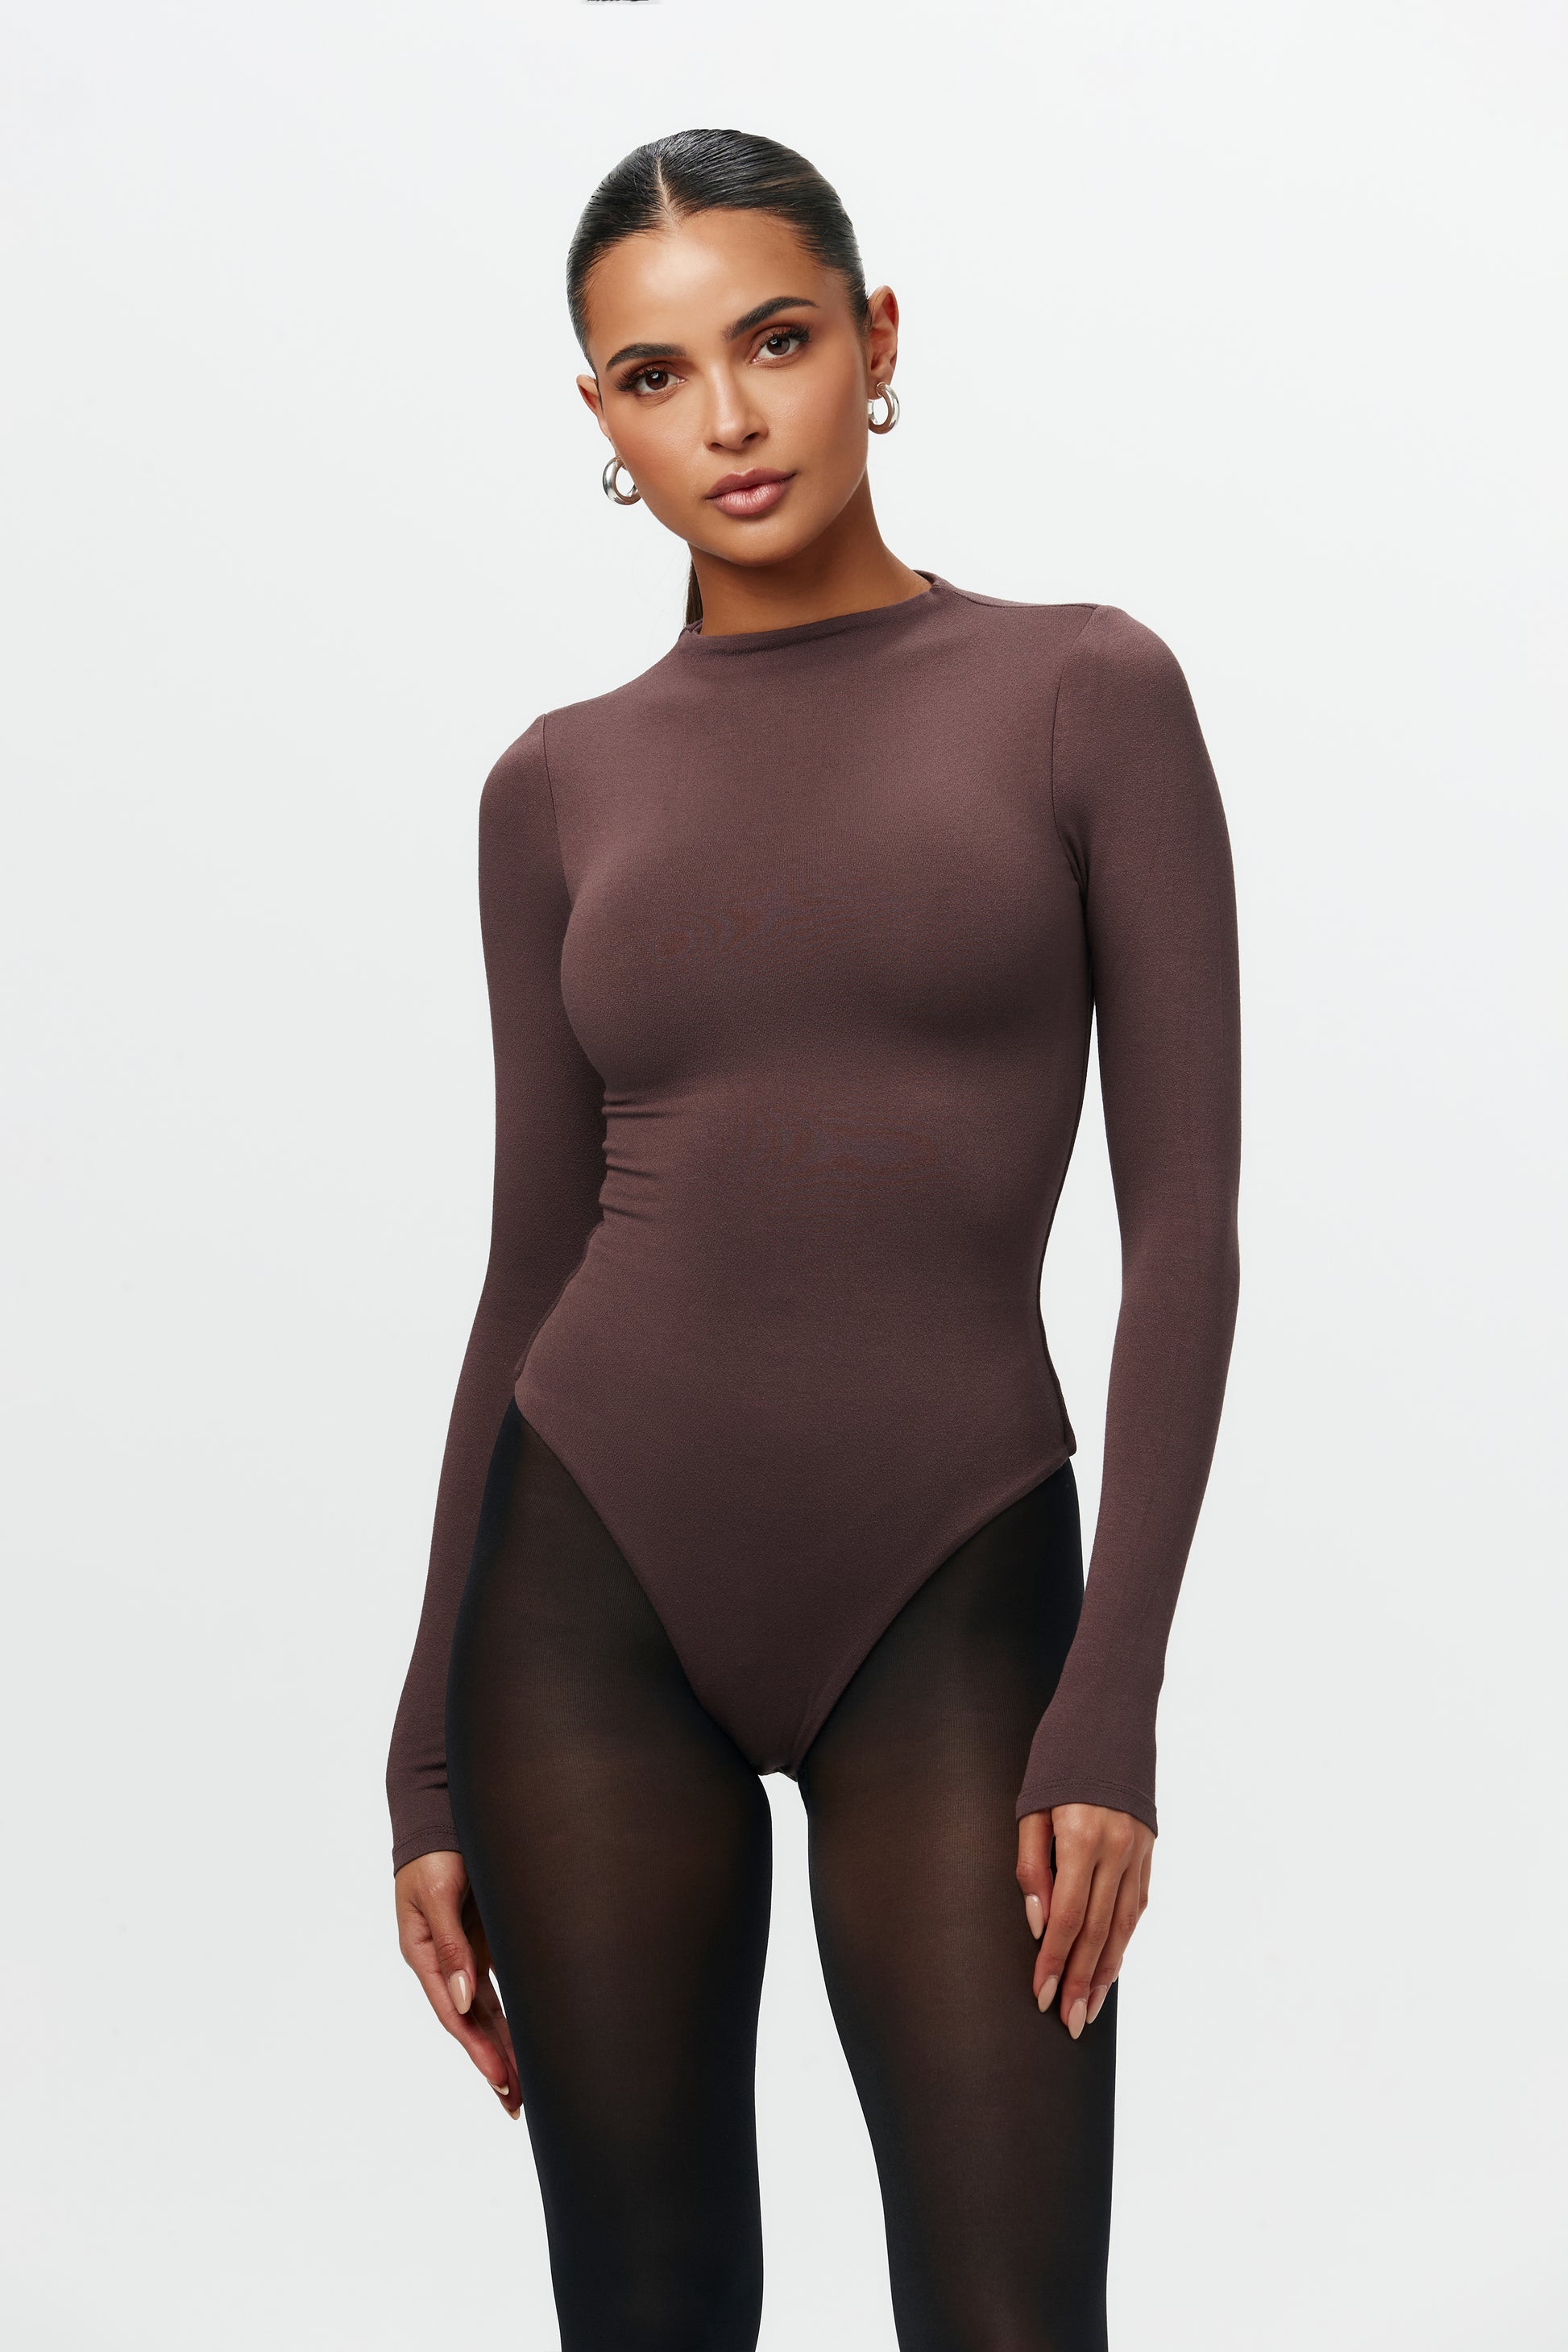 Naked Wardrobe The NW Front Cutout Bodysuit - Macy's